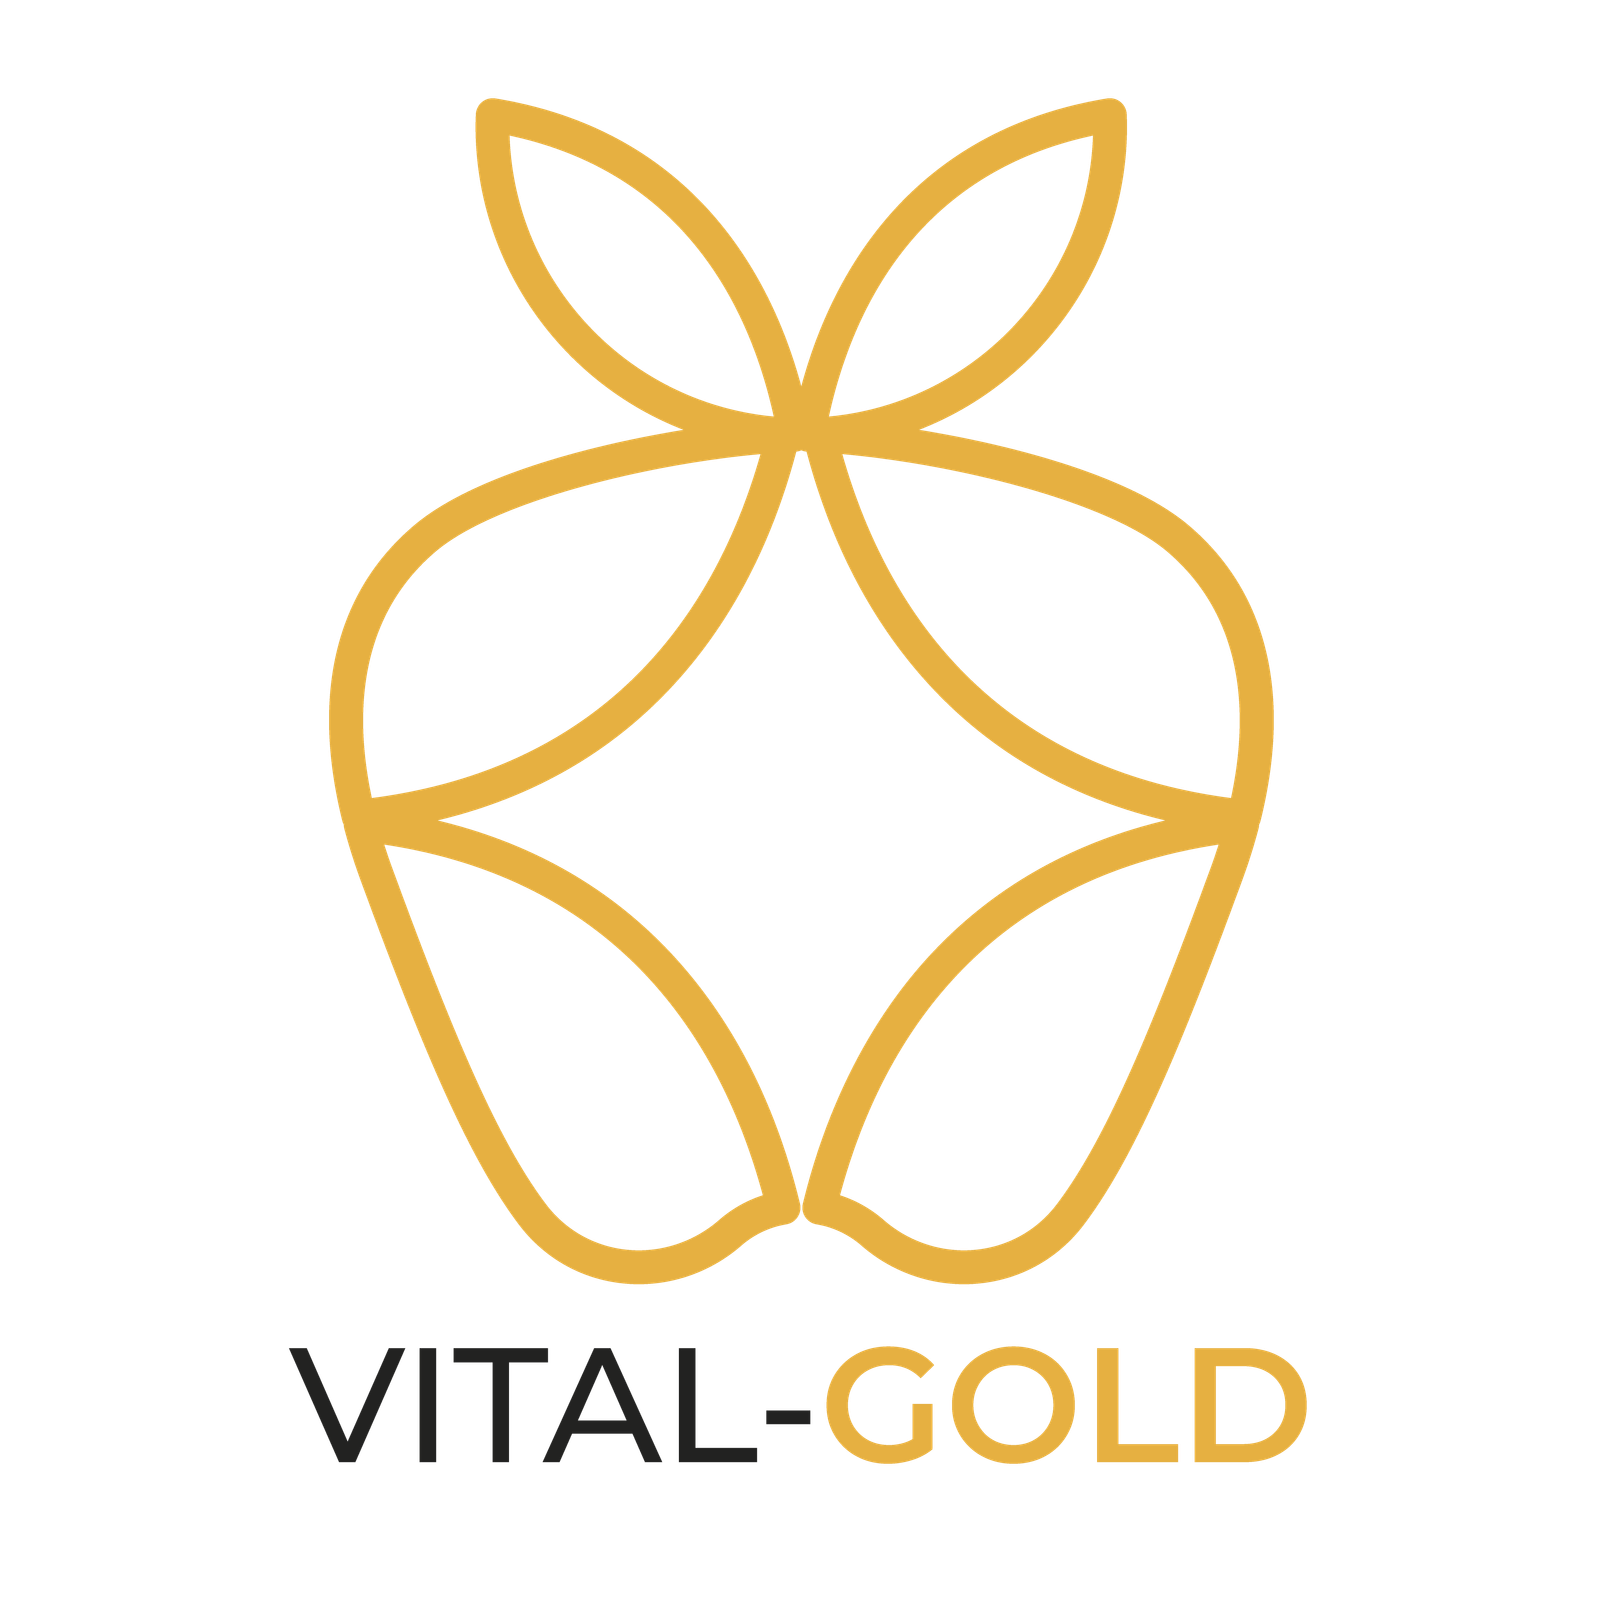 The Vital Gold Supplements